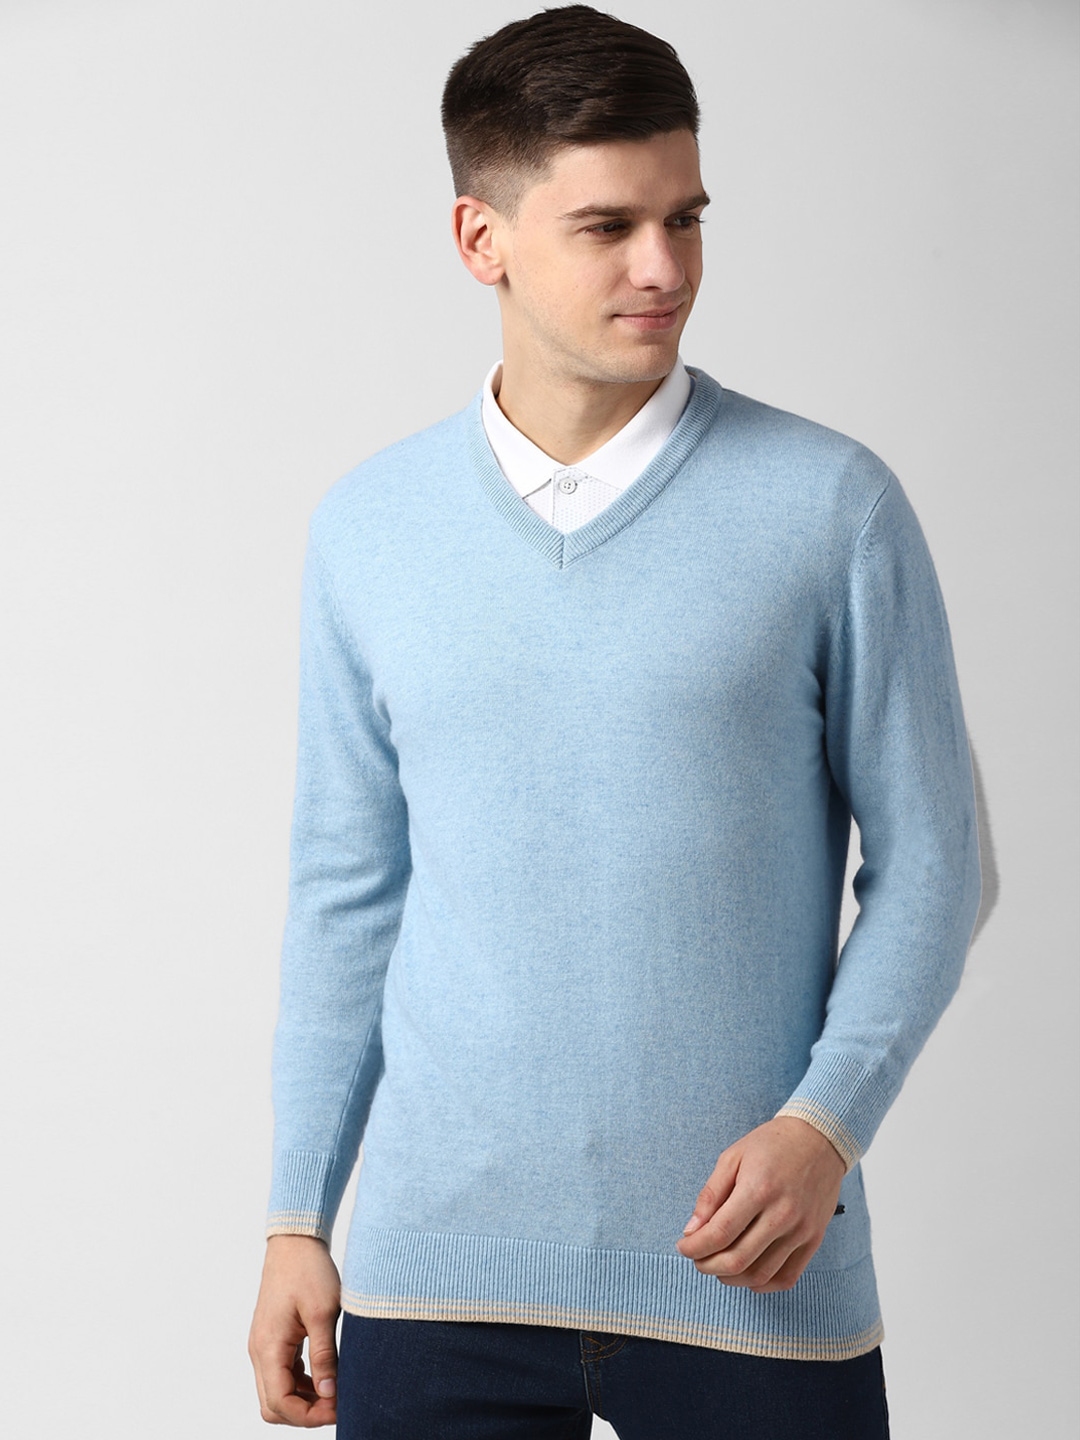 Buy Peter England Casuals Men Blue Solid Pullover Sweater - Sweaters ...